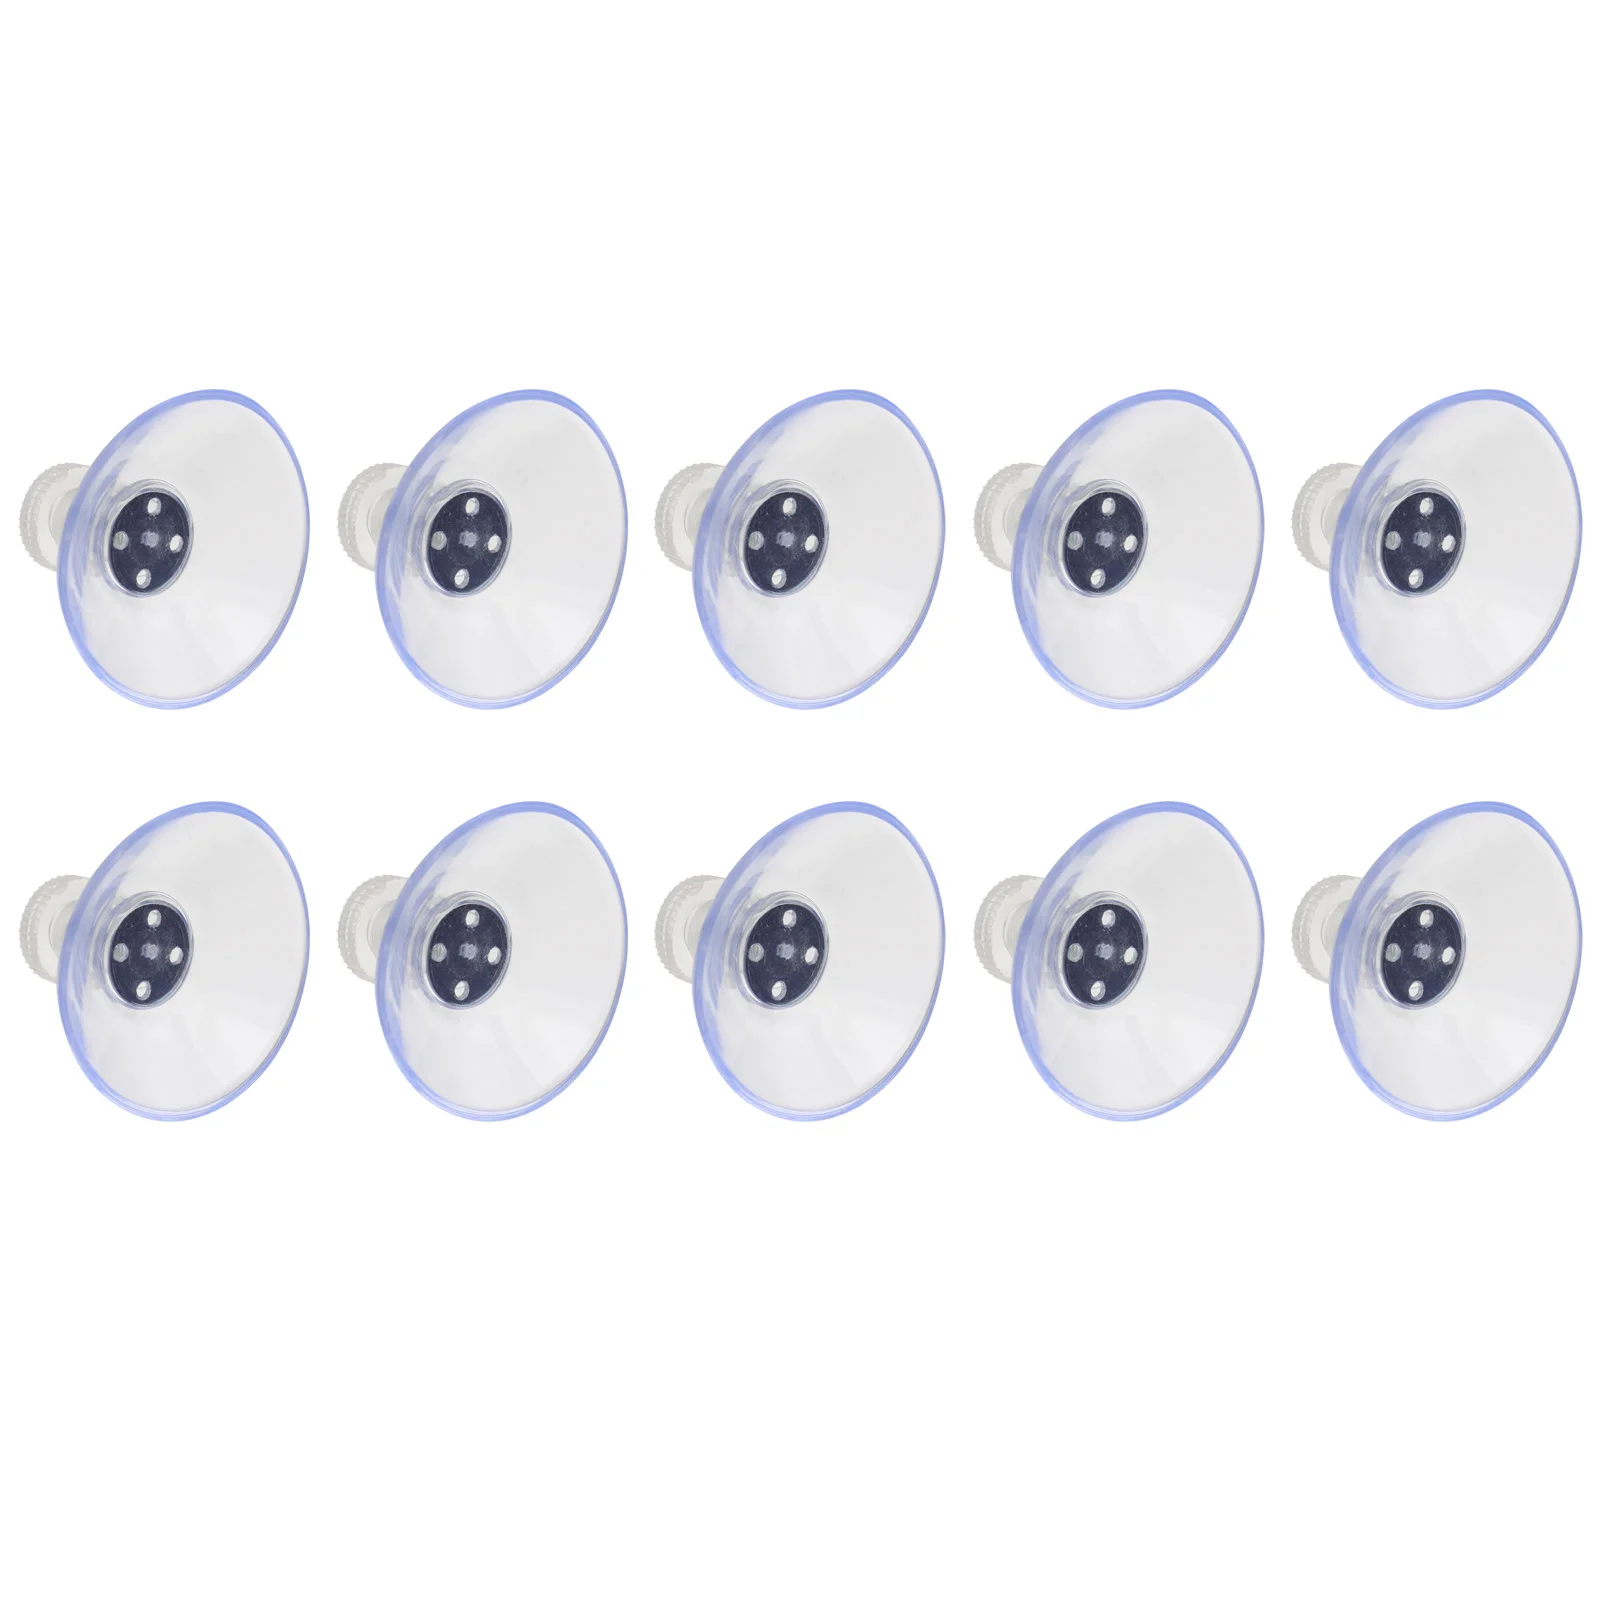 

10 PCS Screw Suction Cup Manual Sucker Hooks Glass Surface Heavy Duty Hangers Clothes Suckers Multi Purpose Towel Cups